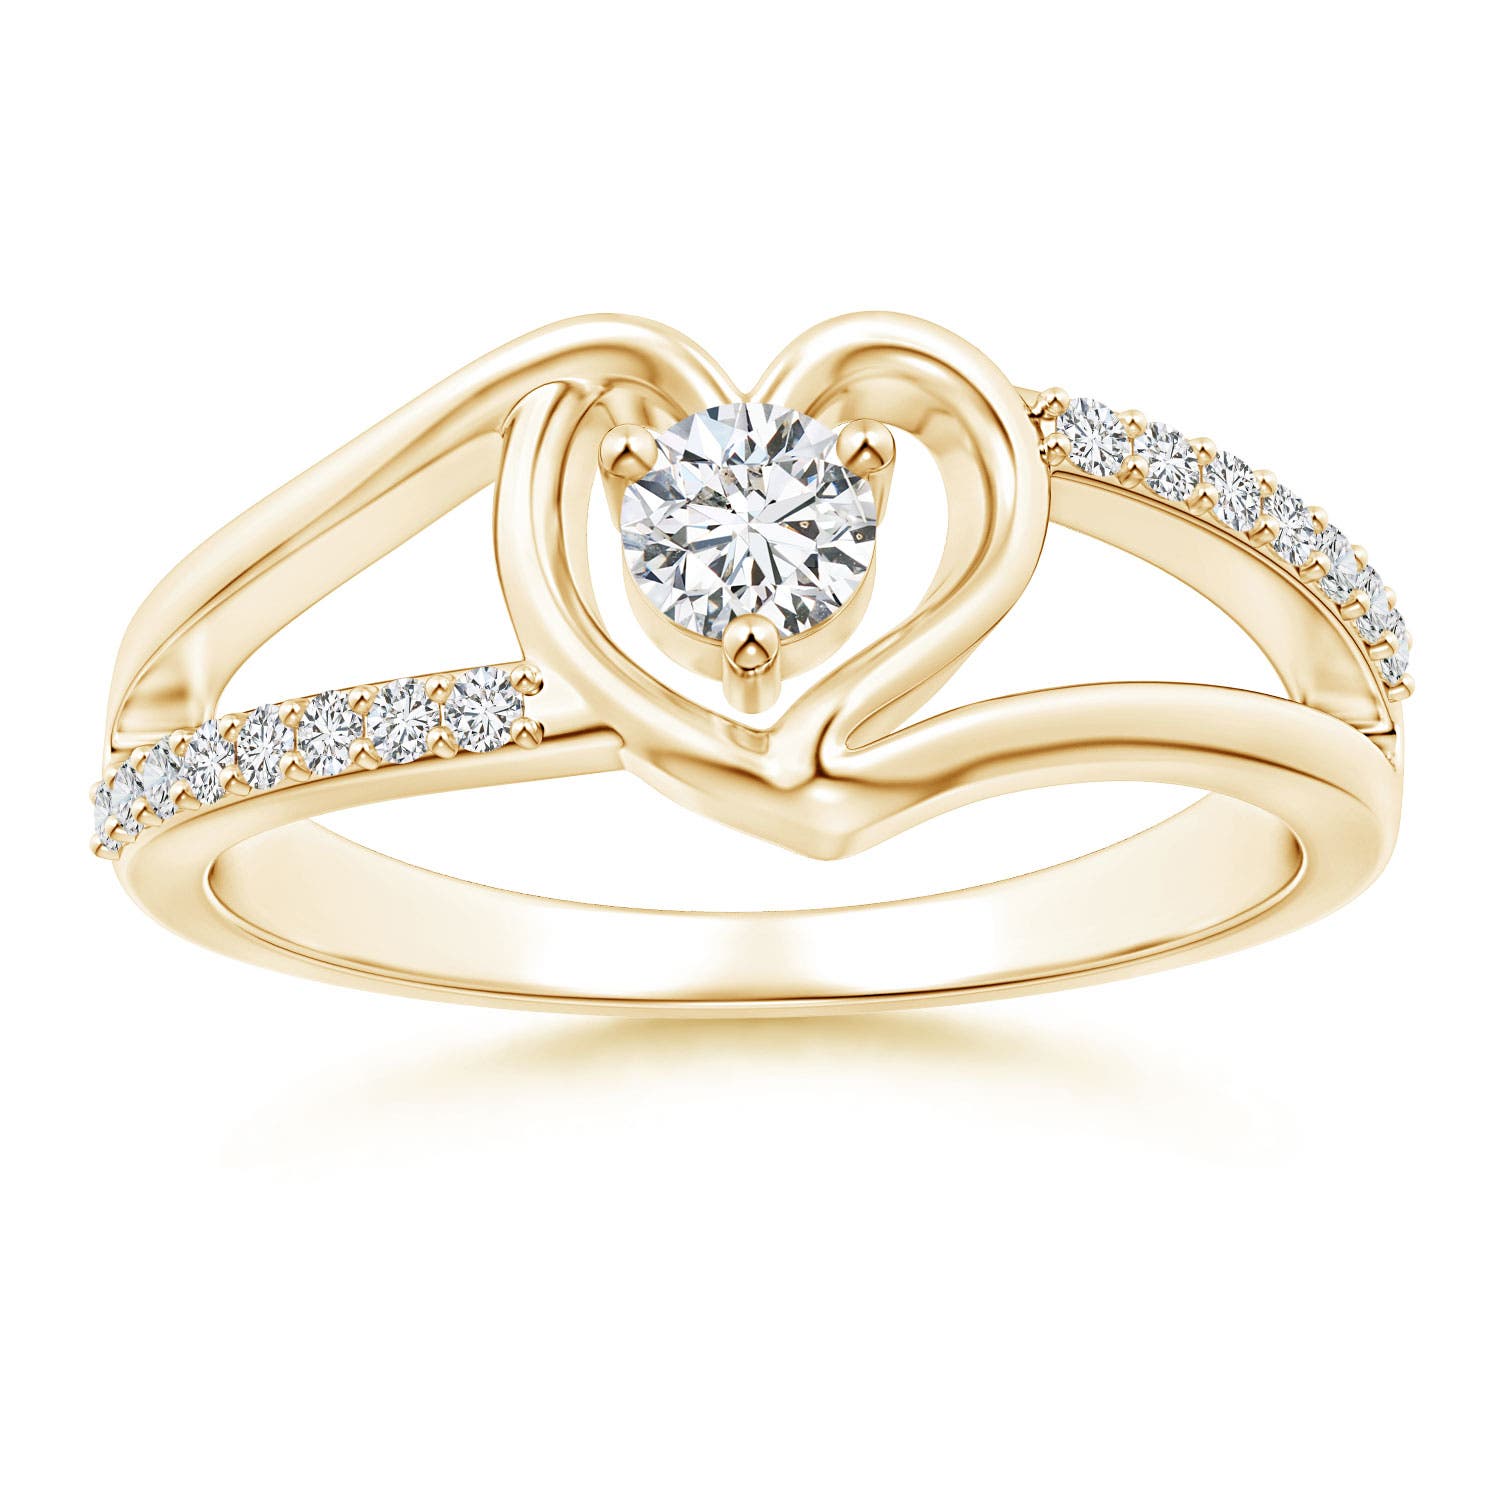 H, SI2 / 0.35 CT / 14 KT Yellow Gold